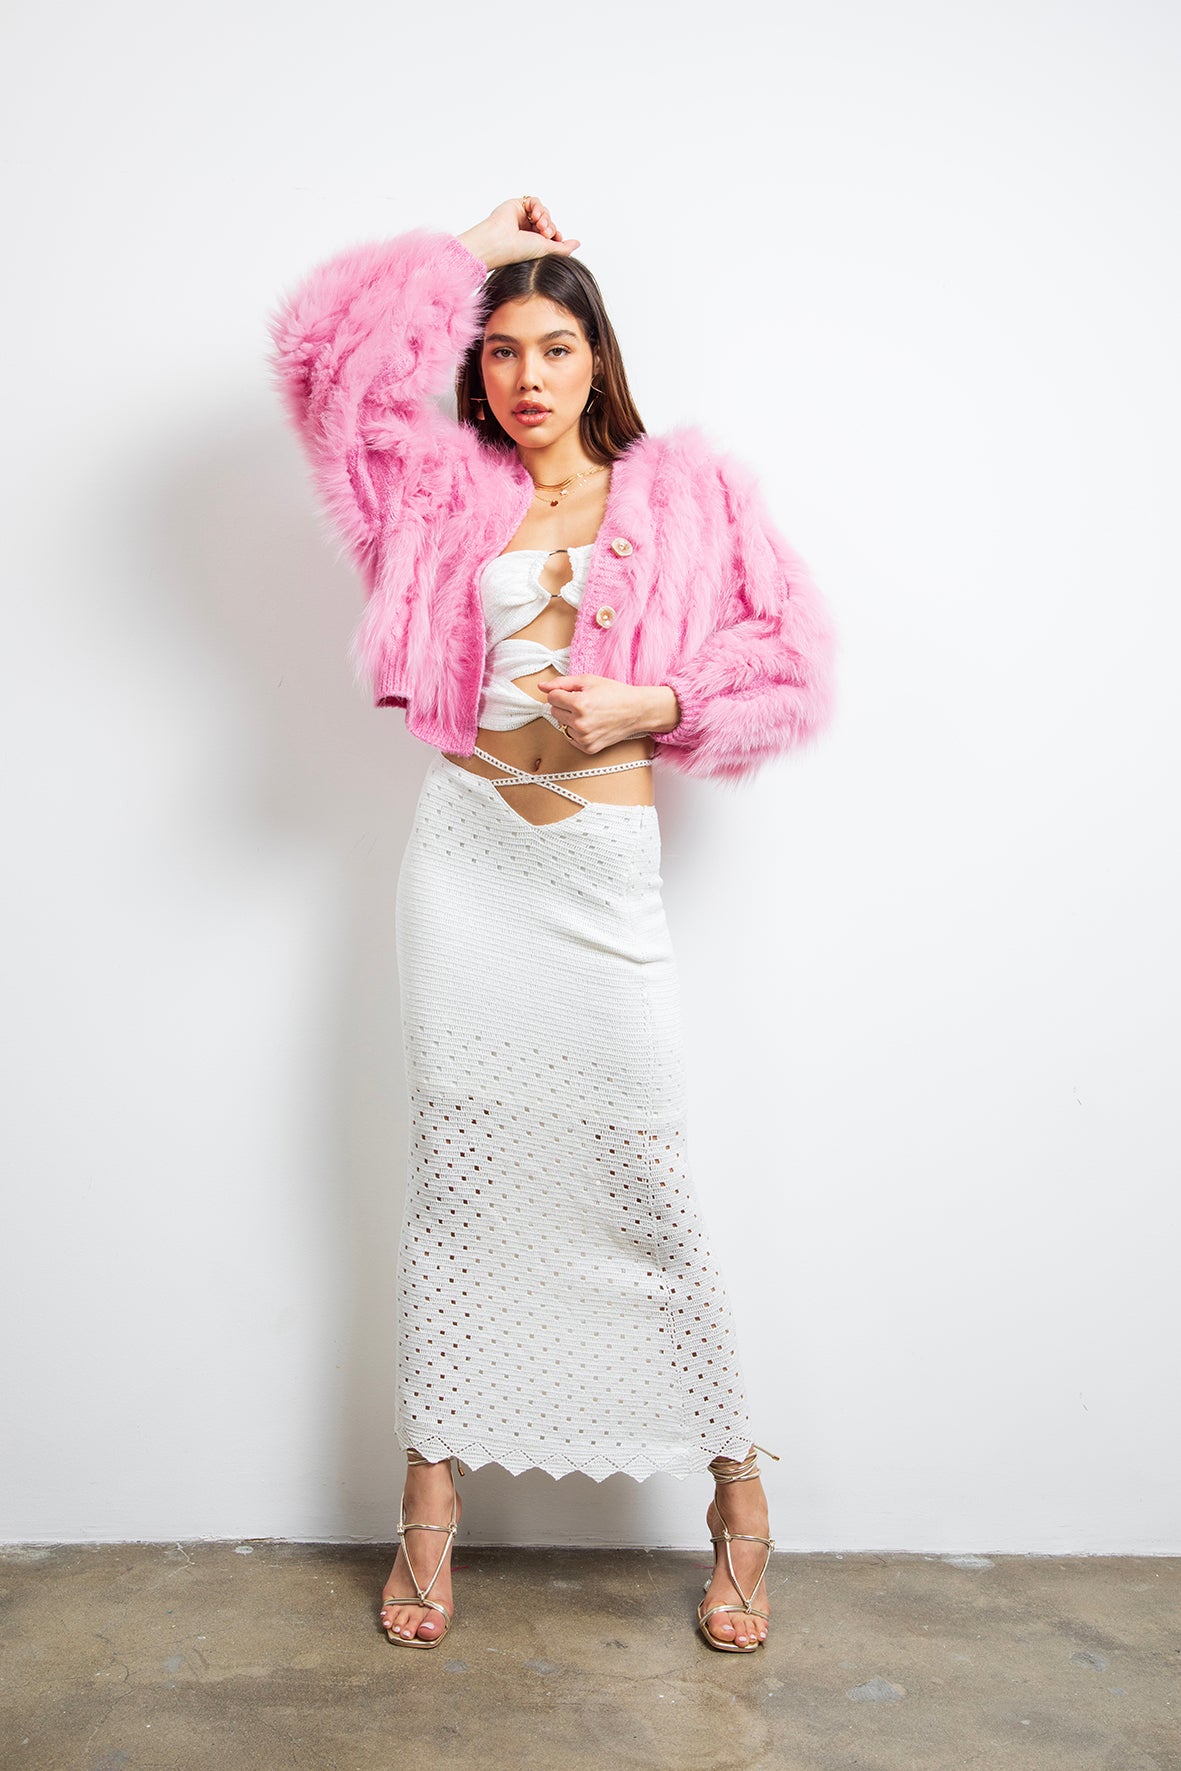 The Furry Fox wool jacket in Pink